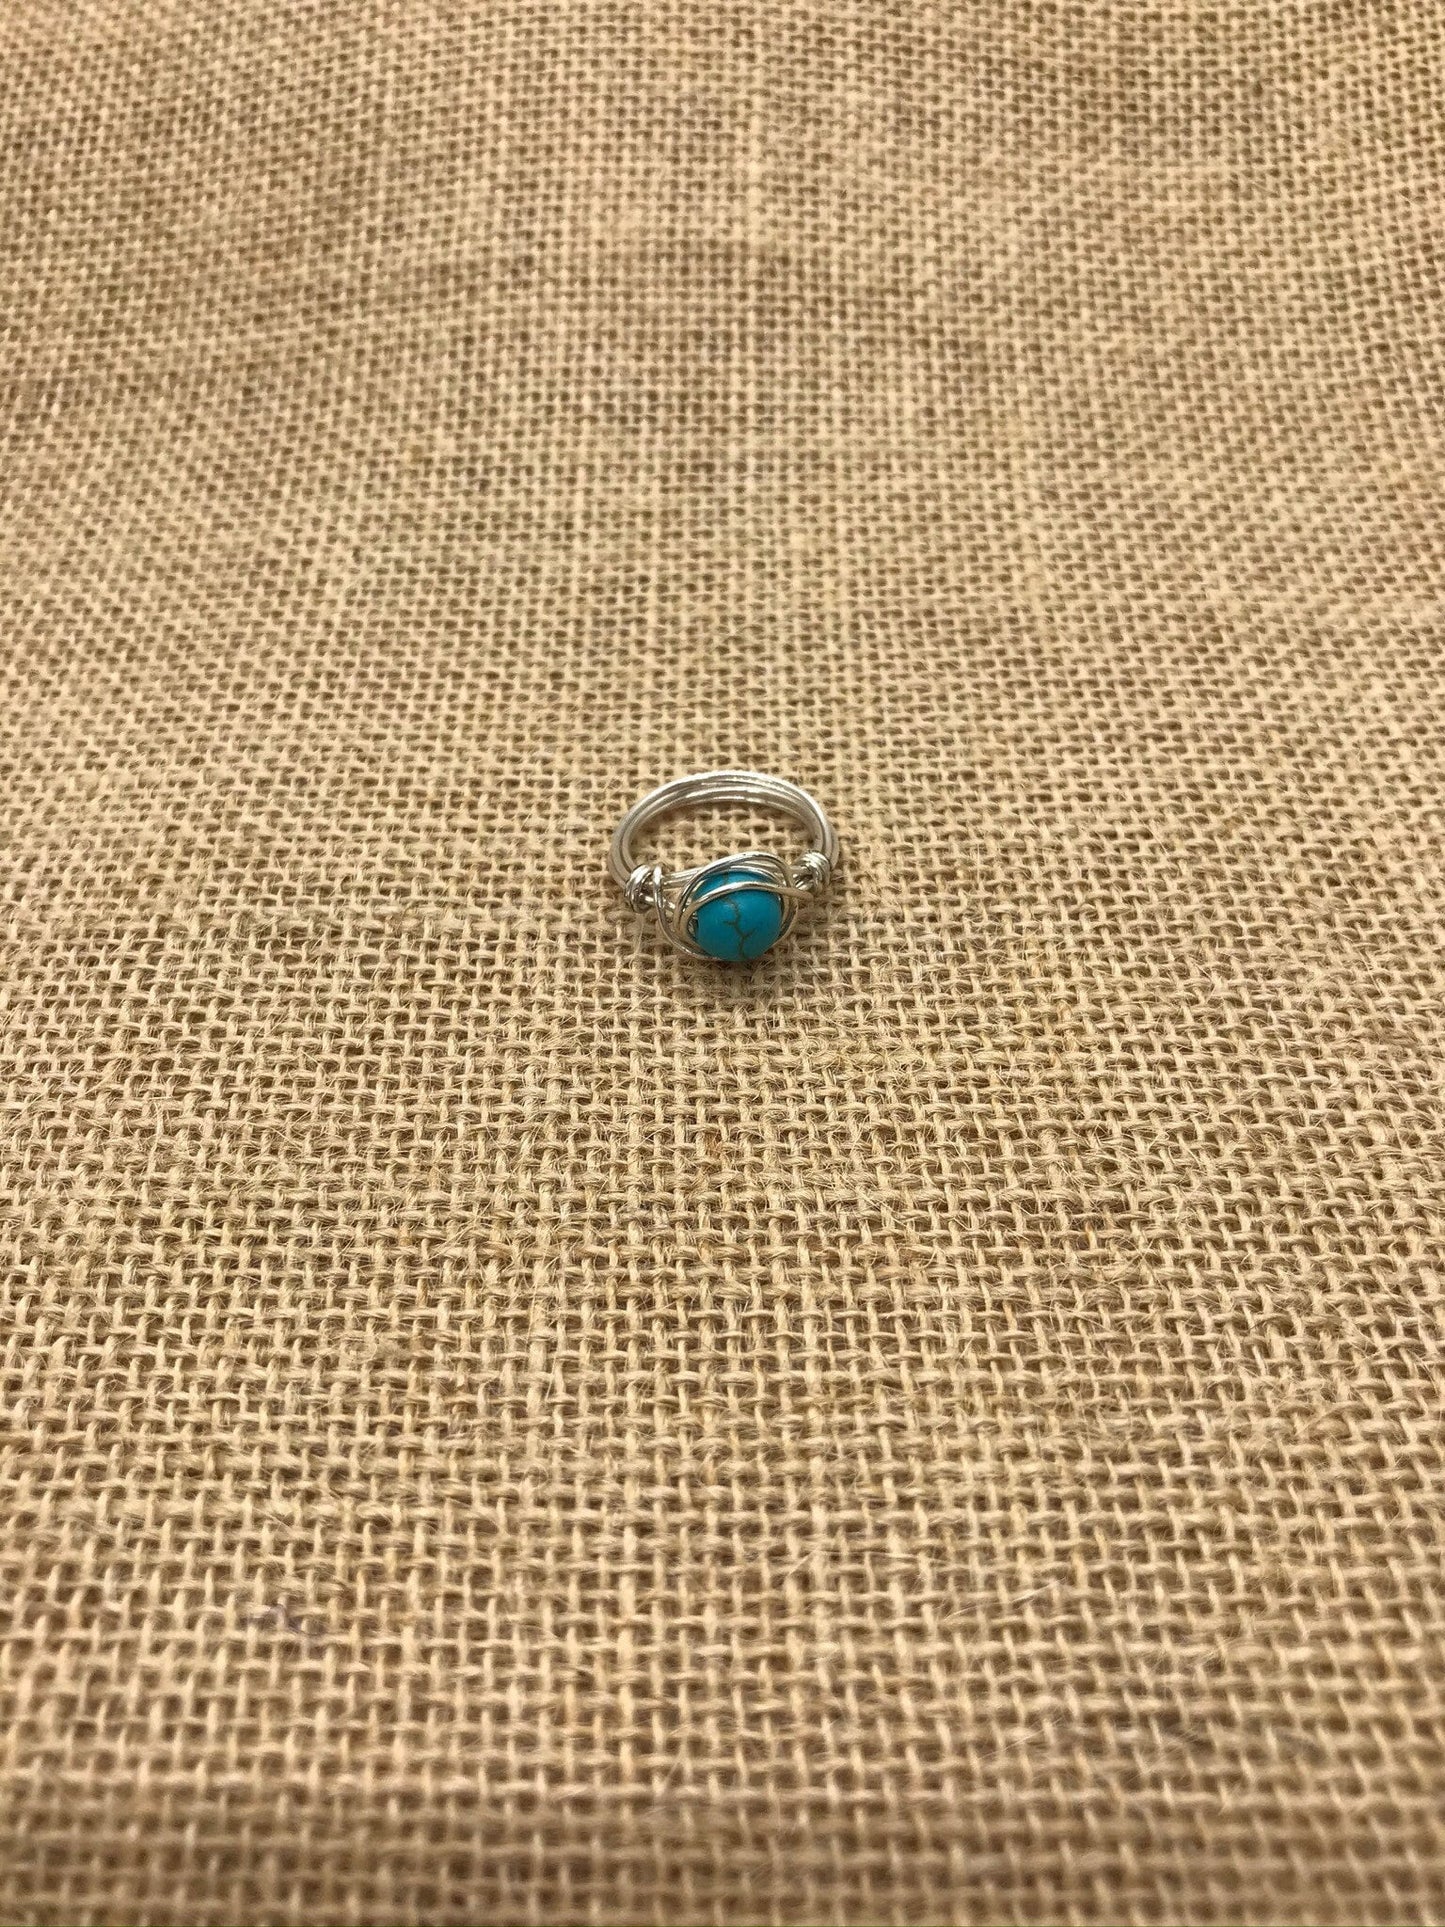 Turquoise Wire Wrapped Ring